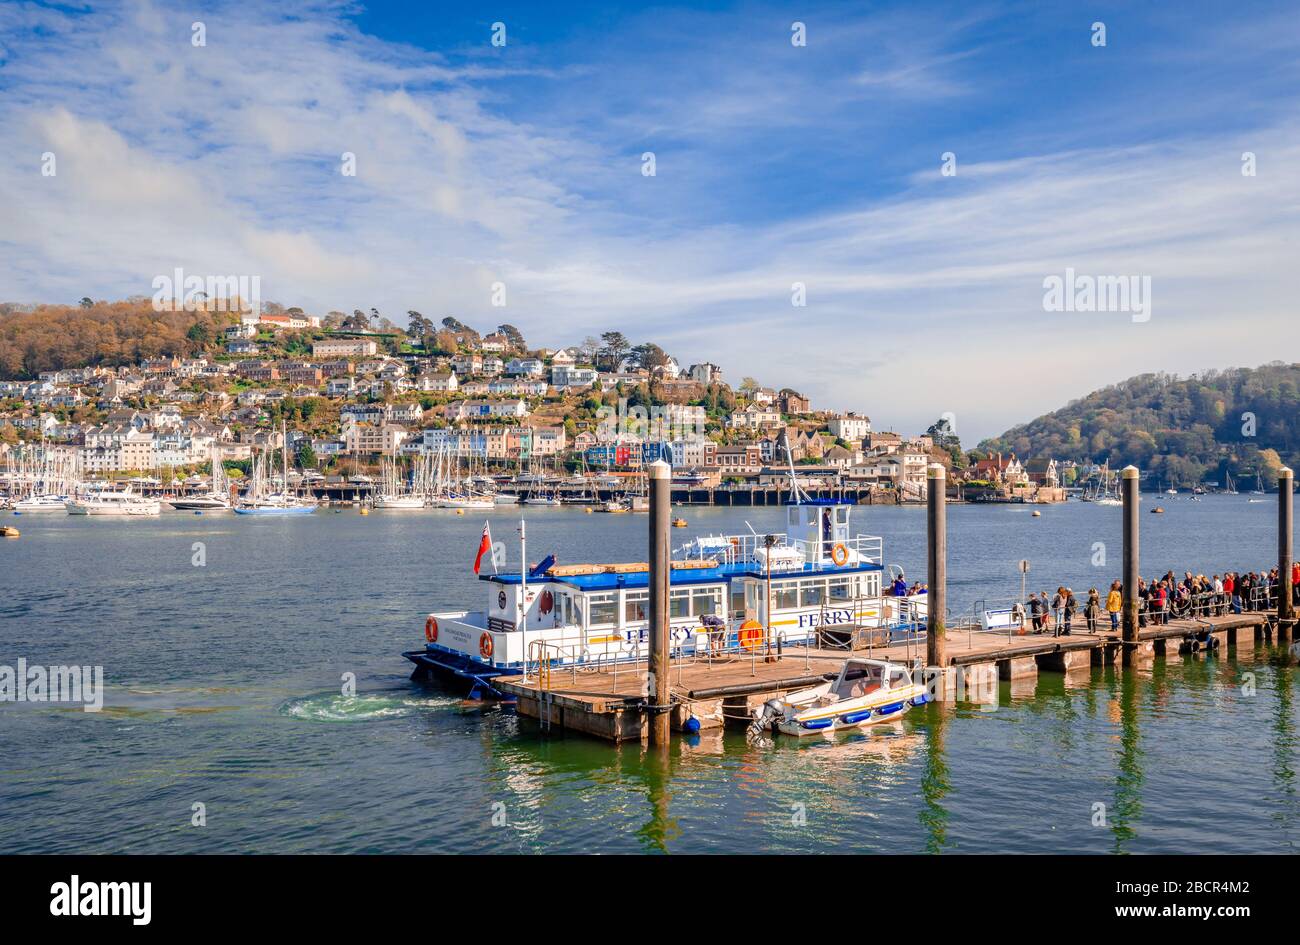 The passengers are ready to embark on the ferry, at the North Embankment terminal in Dartmouth, Devon, England. Kingswear is in the background. Stock Photo